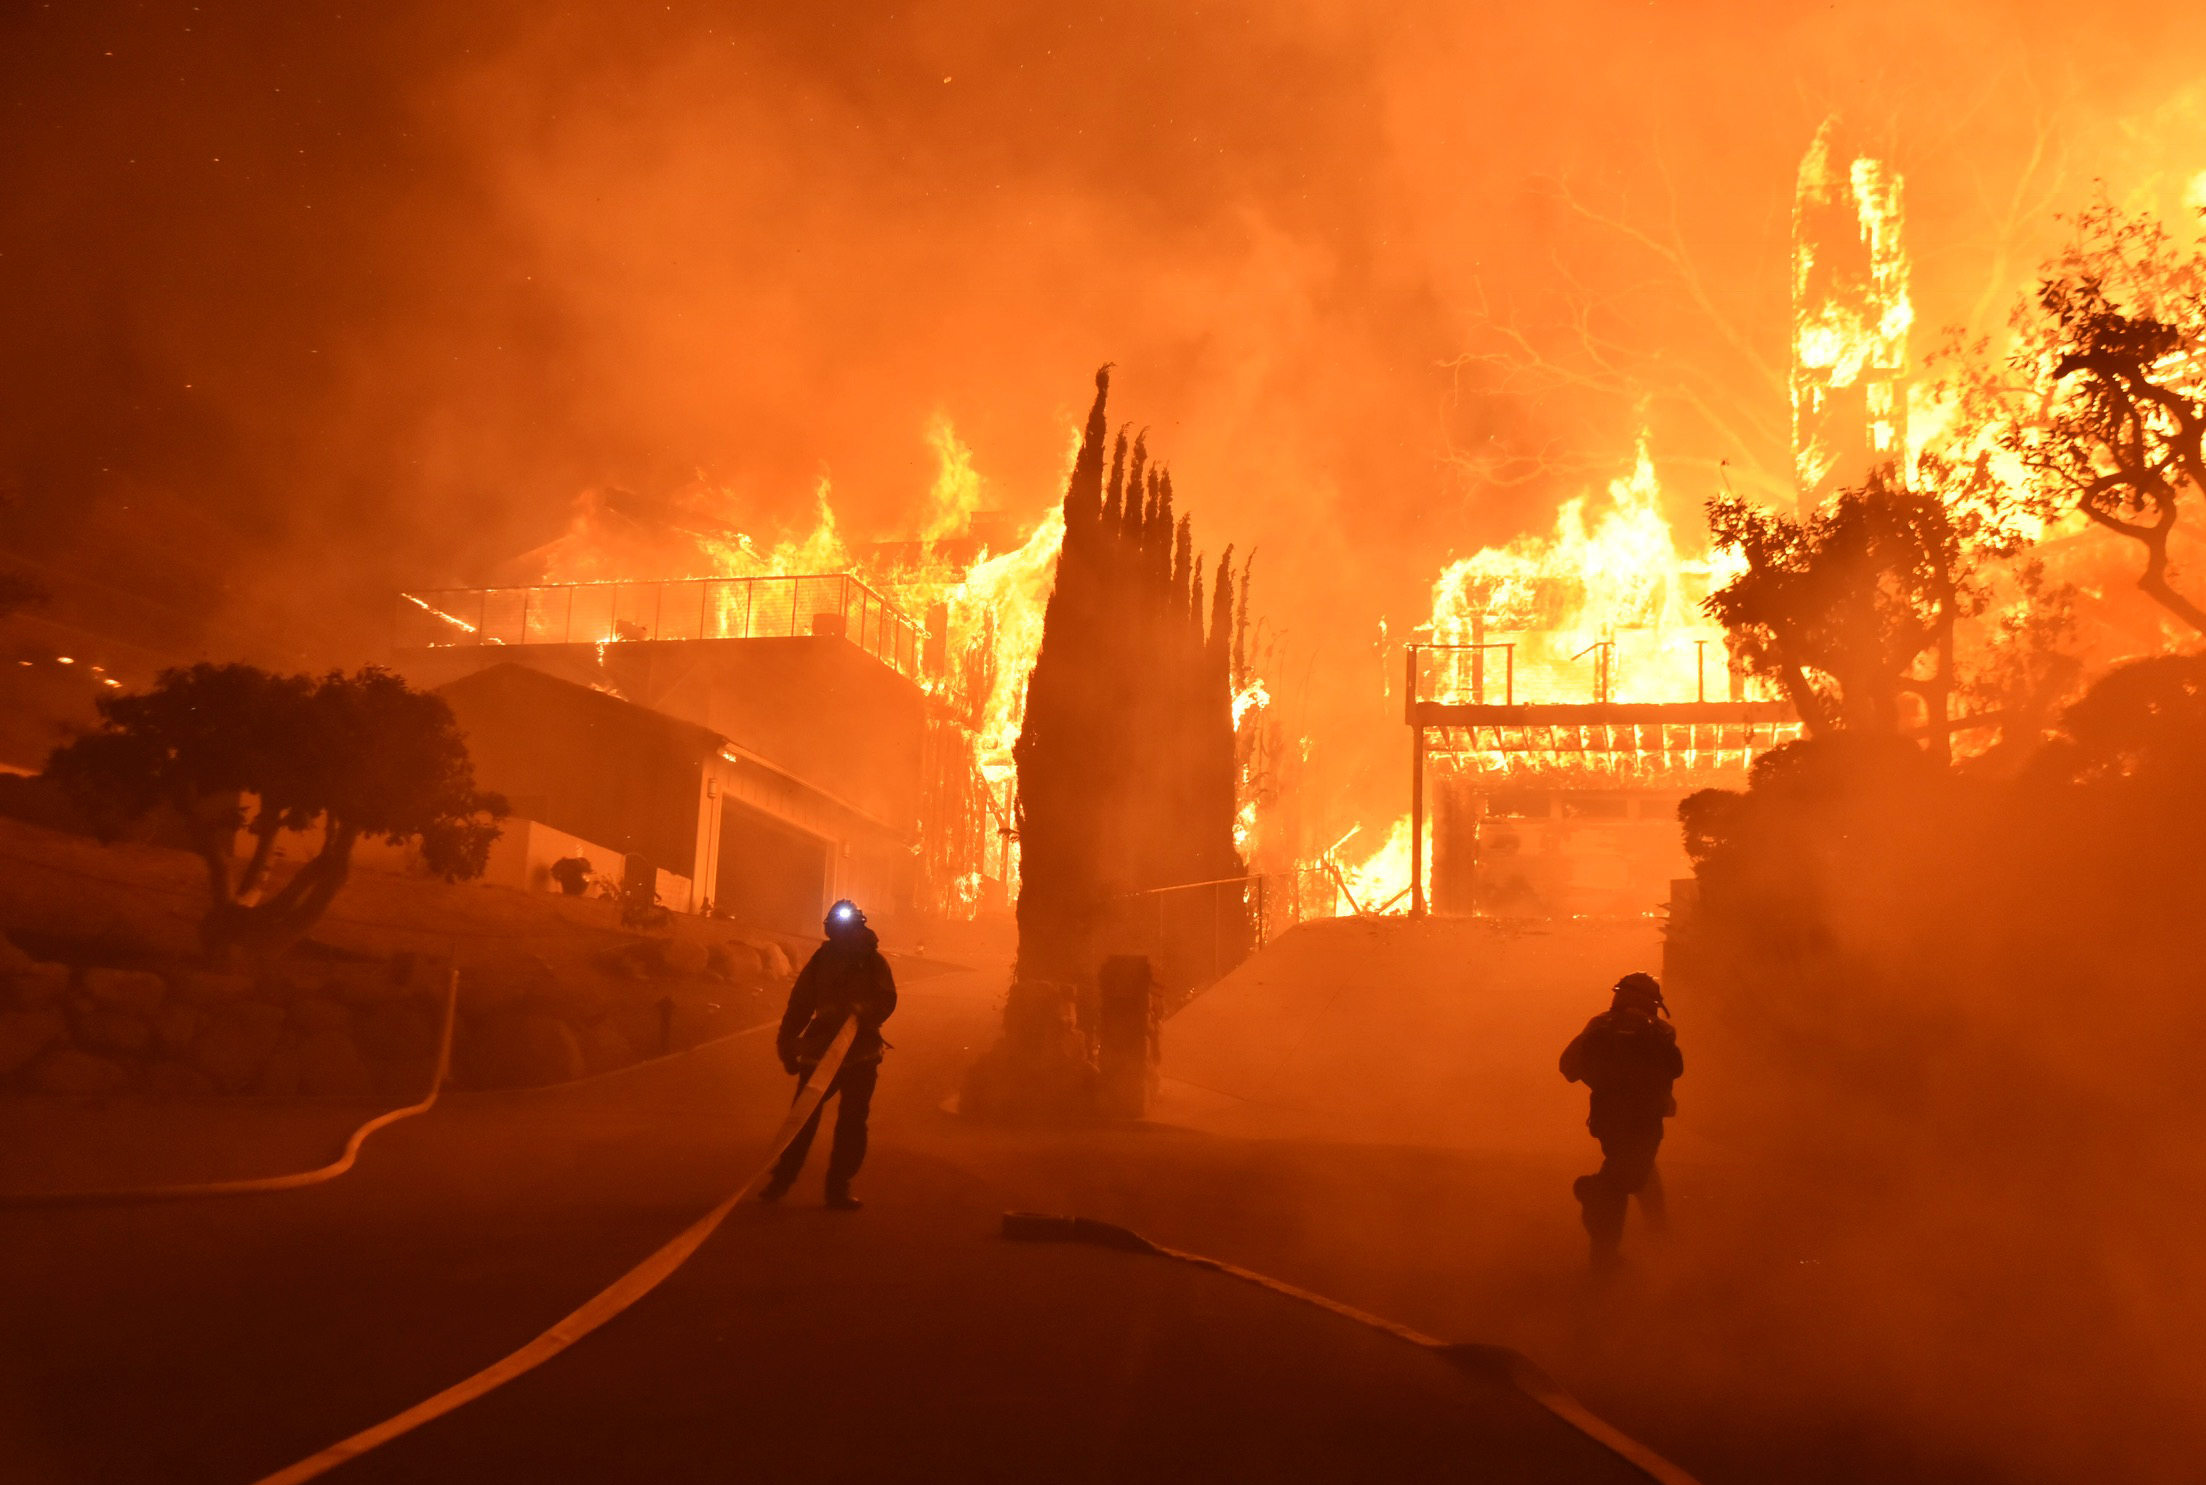 PHOTO: Firefighters work to put out a blaze burning homes early on Dec. 5, 2017, in Ventura, Calif. Authorities said the blaze broke out Monday and grew wildly in the hours that followed, consuming vegetation that hasn't burned in decades.